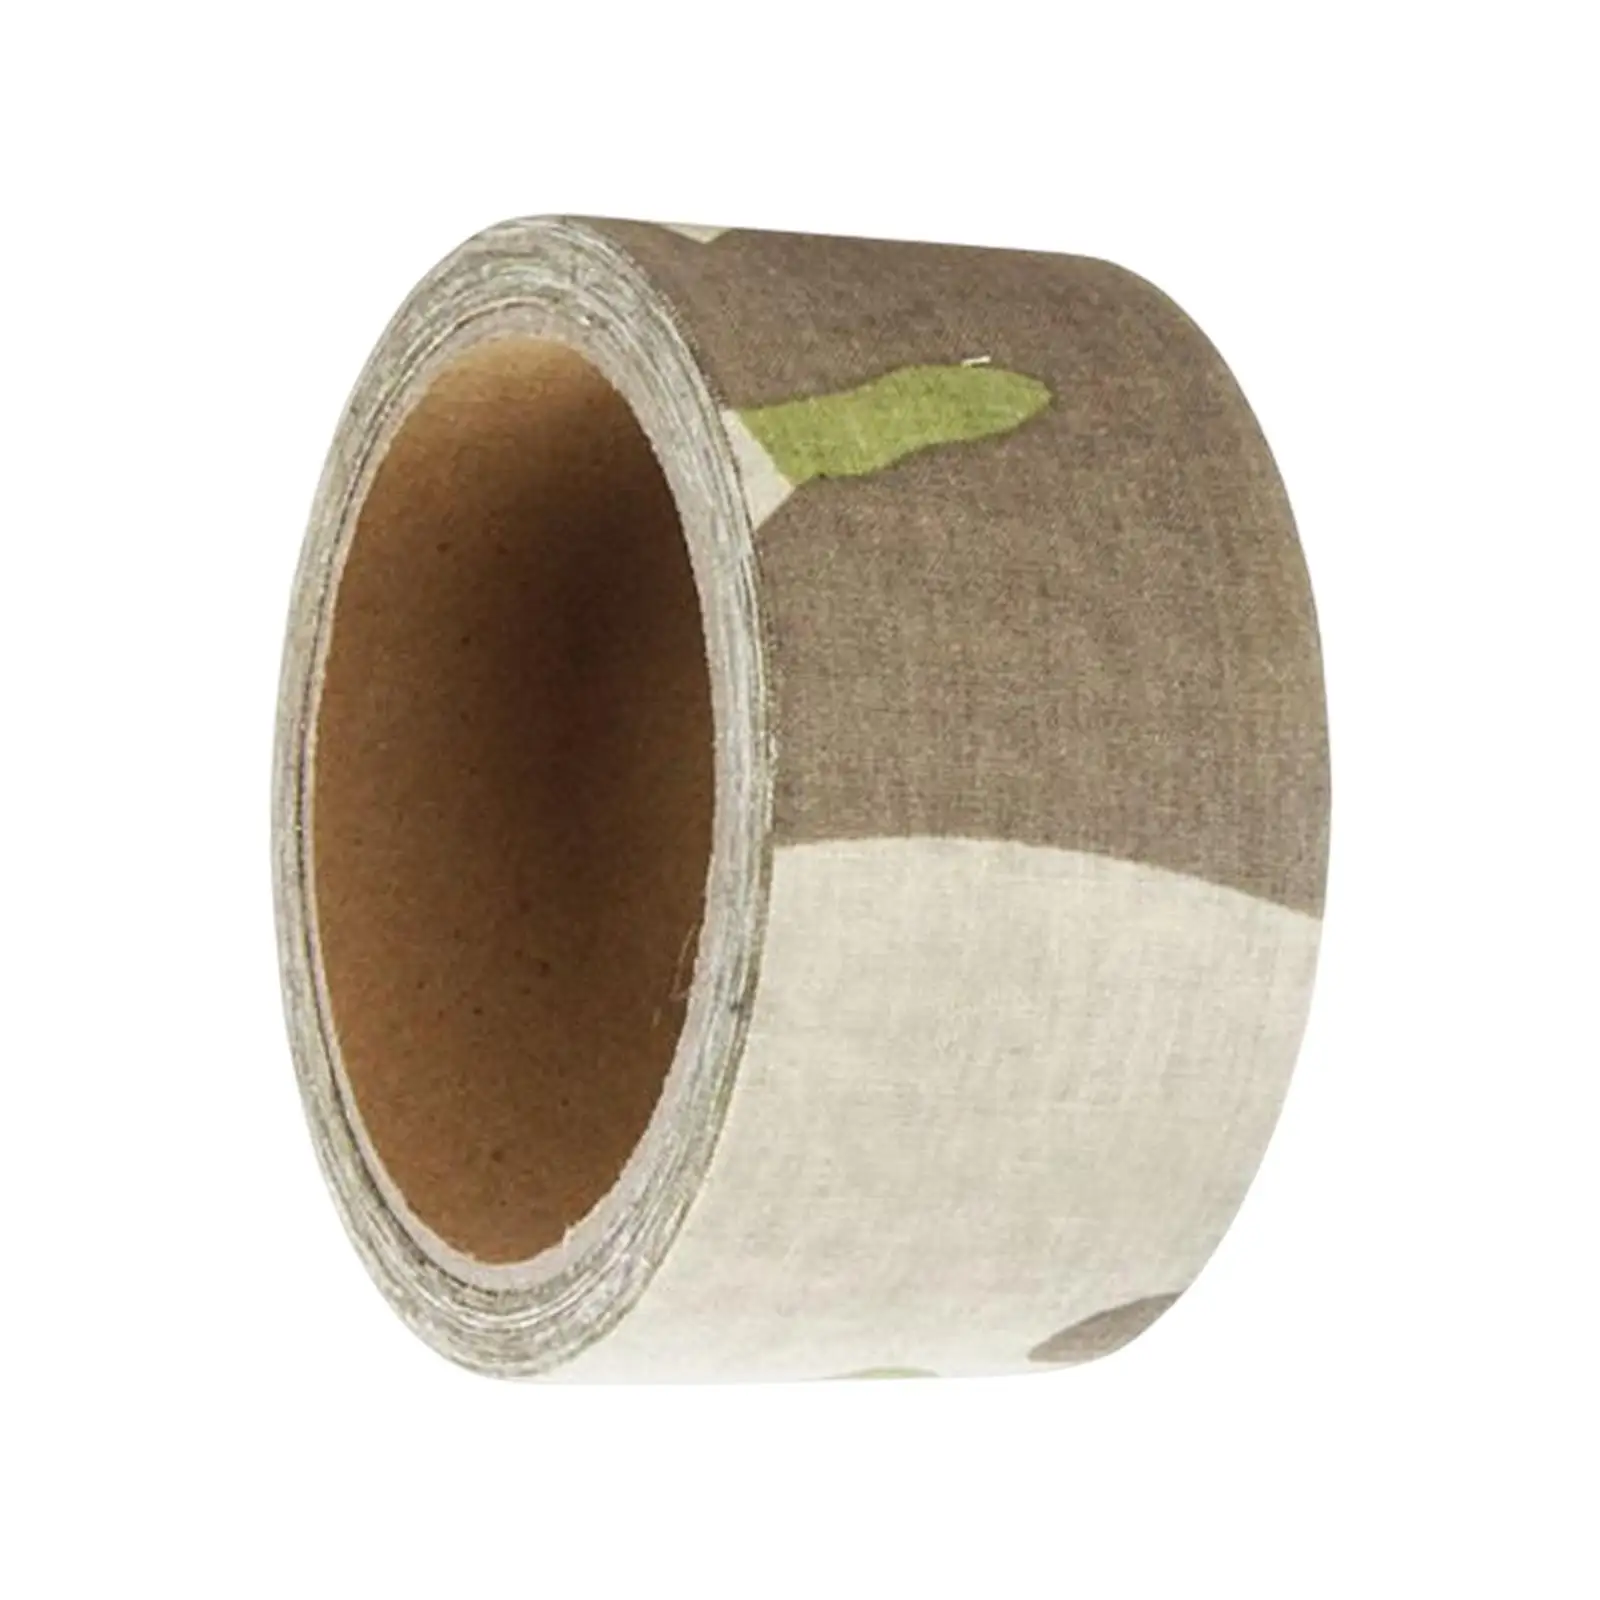 Self Adhesive Tape Hunting Tape Wrap 10 Meter Long 1 Roll for Hunting Wildlife